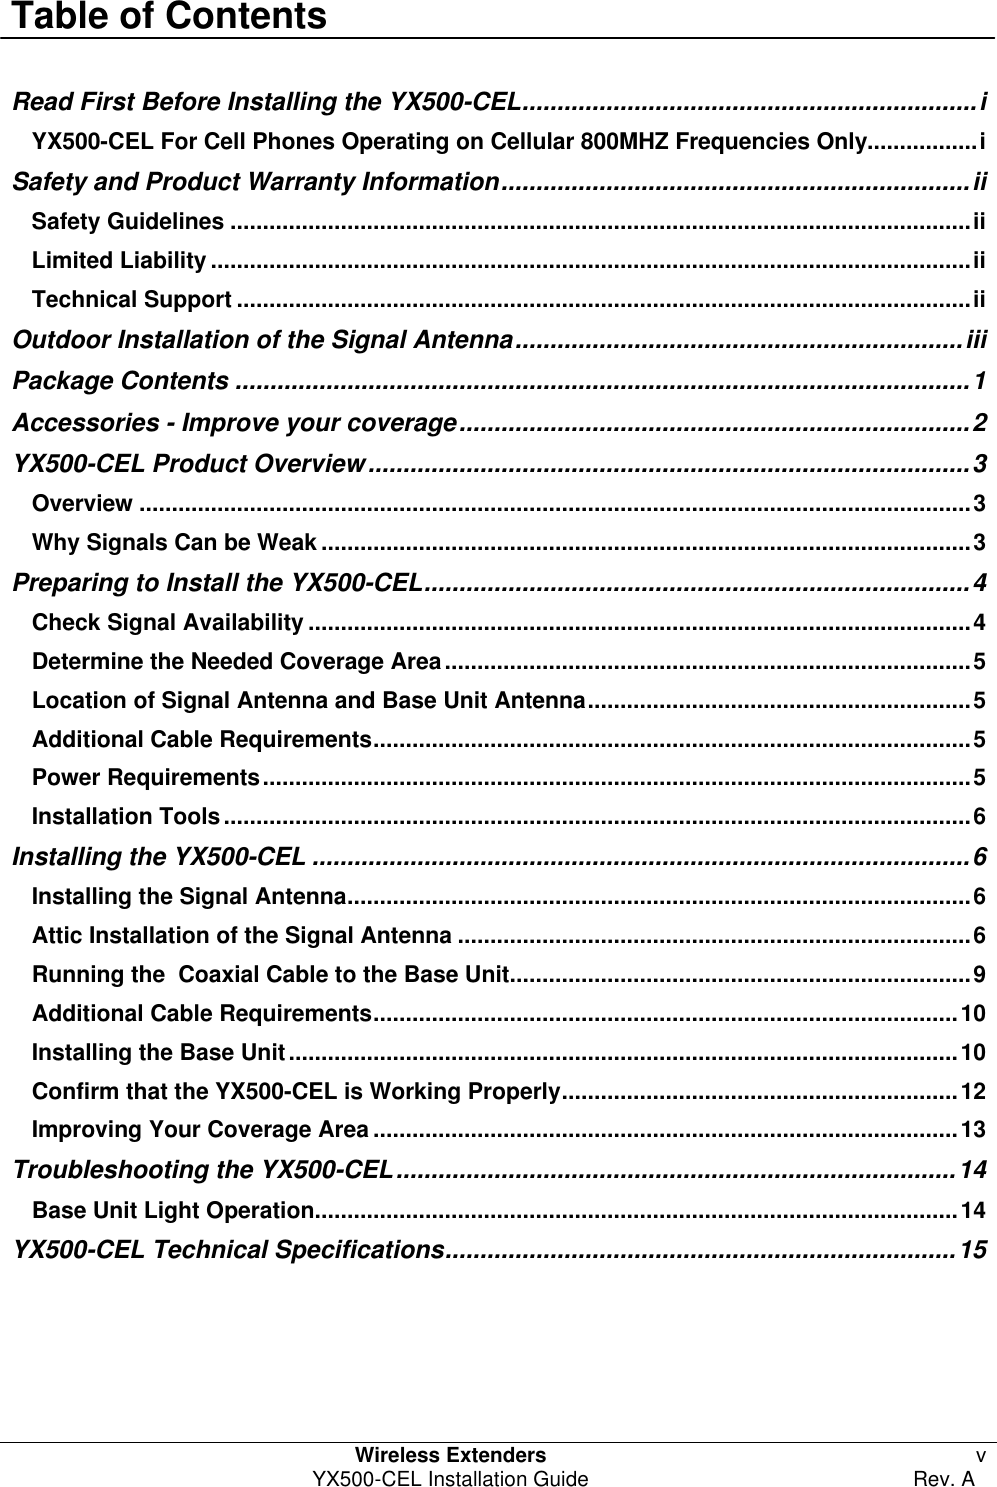  Table of Contents  Wireless Extenders v YX500-CEL Installation Guide Rev. A  Read First Before Installing the YX500-CEL.................................................................i YX500-CEL For Cell Phones Operating on Cellular 800MHZ Frequencies Only.................i Safety and Product Warranty Information...................................................................ii Safety Guidelines ..................................................................................................................ii Limited Liability .....................................................................................................................ii Technical Support .................................................................................................................ii Outdoor Installation of the Signal Antenna................................................................iii Package Contents .........................................................................................................1 Accessories - Improve your coverage.........................................................................2 YX500-CEL Product Overview......................................................................................3 Overview ................................................................................................................................3 Why Signals Can be Weak ....................................................................................................3 Preparing to Install the YX500-CEL..............................................................................4 Check Signal Availability ......................................................................................................4 Determine the Needed Coverage Area.................................................................................5 Location of Signal Antenna and Base Unit Antenna...........................................................5 Additional Cable Requirements............................................................................................5 Power Requirements.............................................................................................................5 Installation Tools...................................................................................................................6 Installing the YX500-CEL ..............................................................................................6 Installing the Signal Antenna................................................................................................6 Attic Installation of the Signal Antenna ...............................................................................6 Running the  Coaxial Cable to the Base Unit.......................................................................9 Additional Cable Requirements..........................................................................................10 Installing the Base Unit.......................................................................................................10 Confirm that the YX500-CEL is Working Properly.............................................................12 Improving Your Coverage Area ..........................................................................................13 Troubleshooting the YX500-CEL................................................................................14 Base Unit Light Operation...................................................................................................14 YX500-CEL Technical Specifications.........................................................................15  